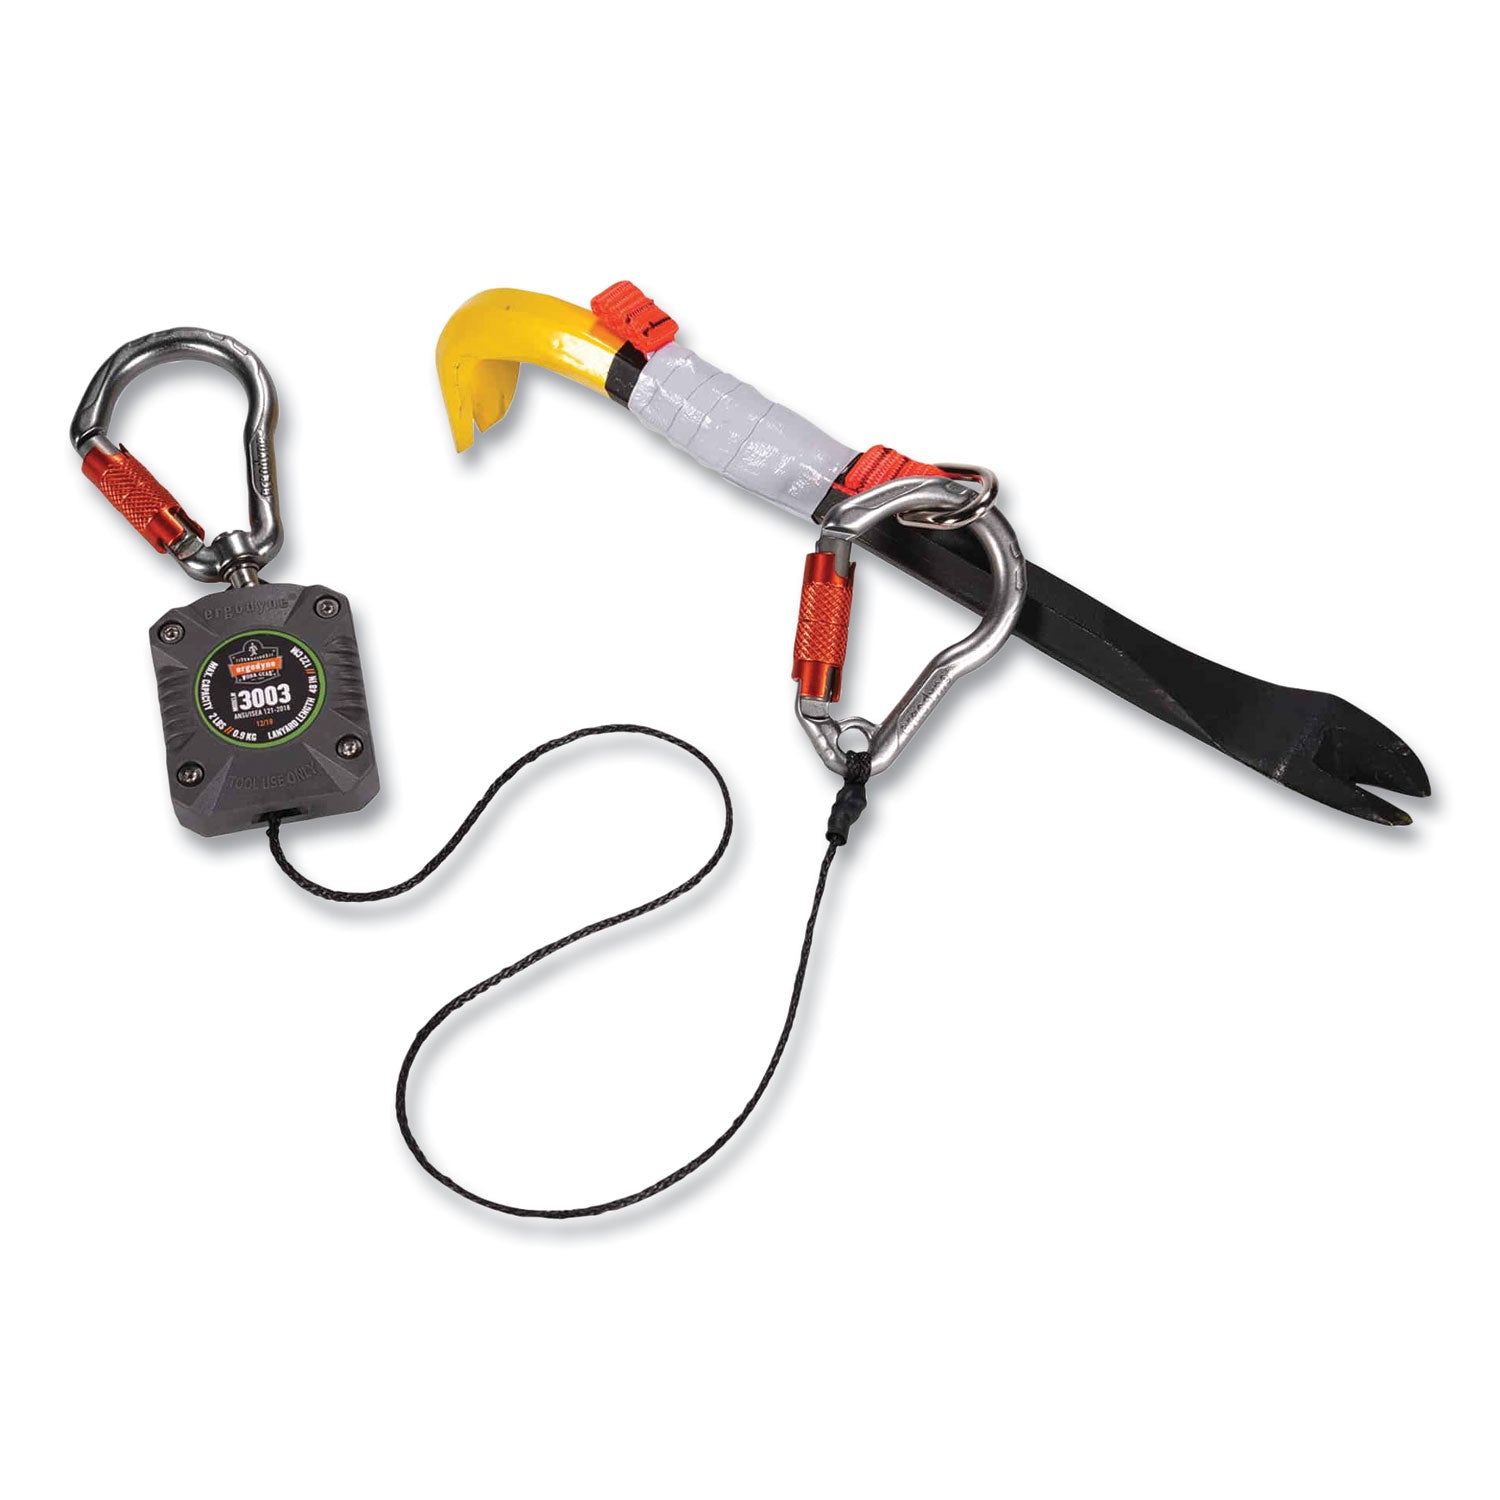 squids-3003-retractable-lanyard-with-two-carabiners-2-lb-max-working-capacity-8-to-48-gray-ships-in-1-3-business-days_ego19303 - 8